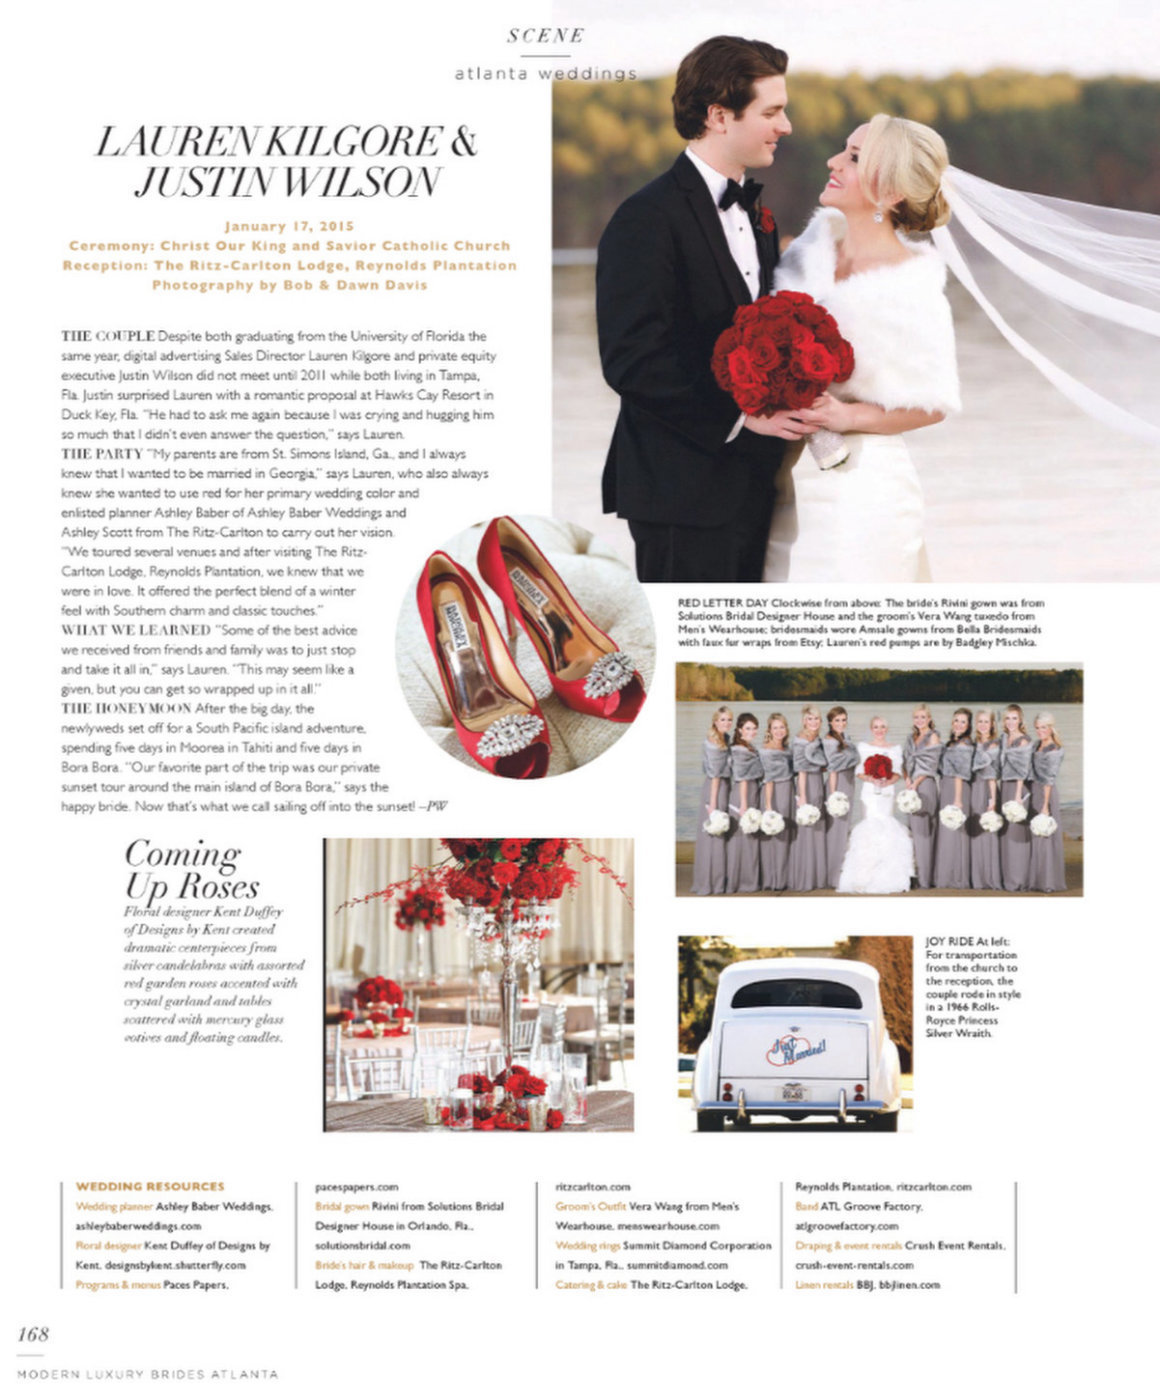 What an honor to see Lauren and Justin's wedding featured in Modern Luxury Brides - Atlanta June 2015 edition. Thank you Phebe Wahl for selecting their beautiful wedding at The Ritz-Carlton Lodge, Reynolds Plantation to be featured... such an incredible honor! Hugs and kisses to all who made this wedding a dream come true for Lauren & Justin!